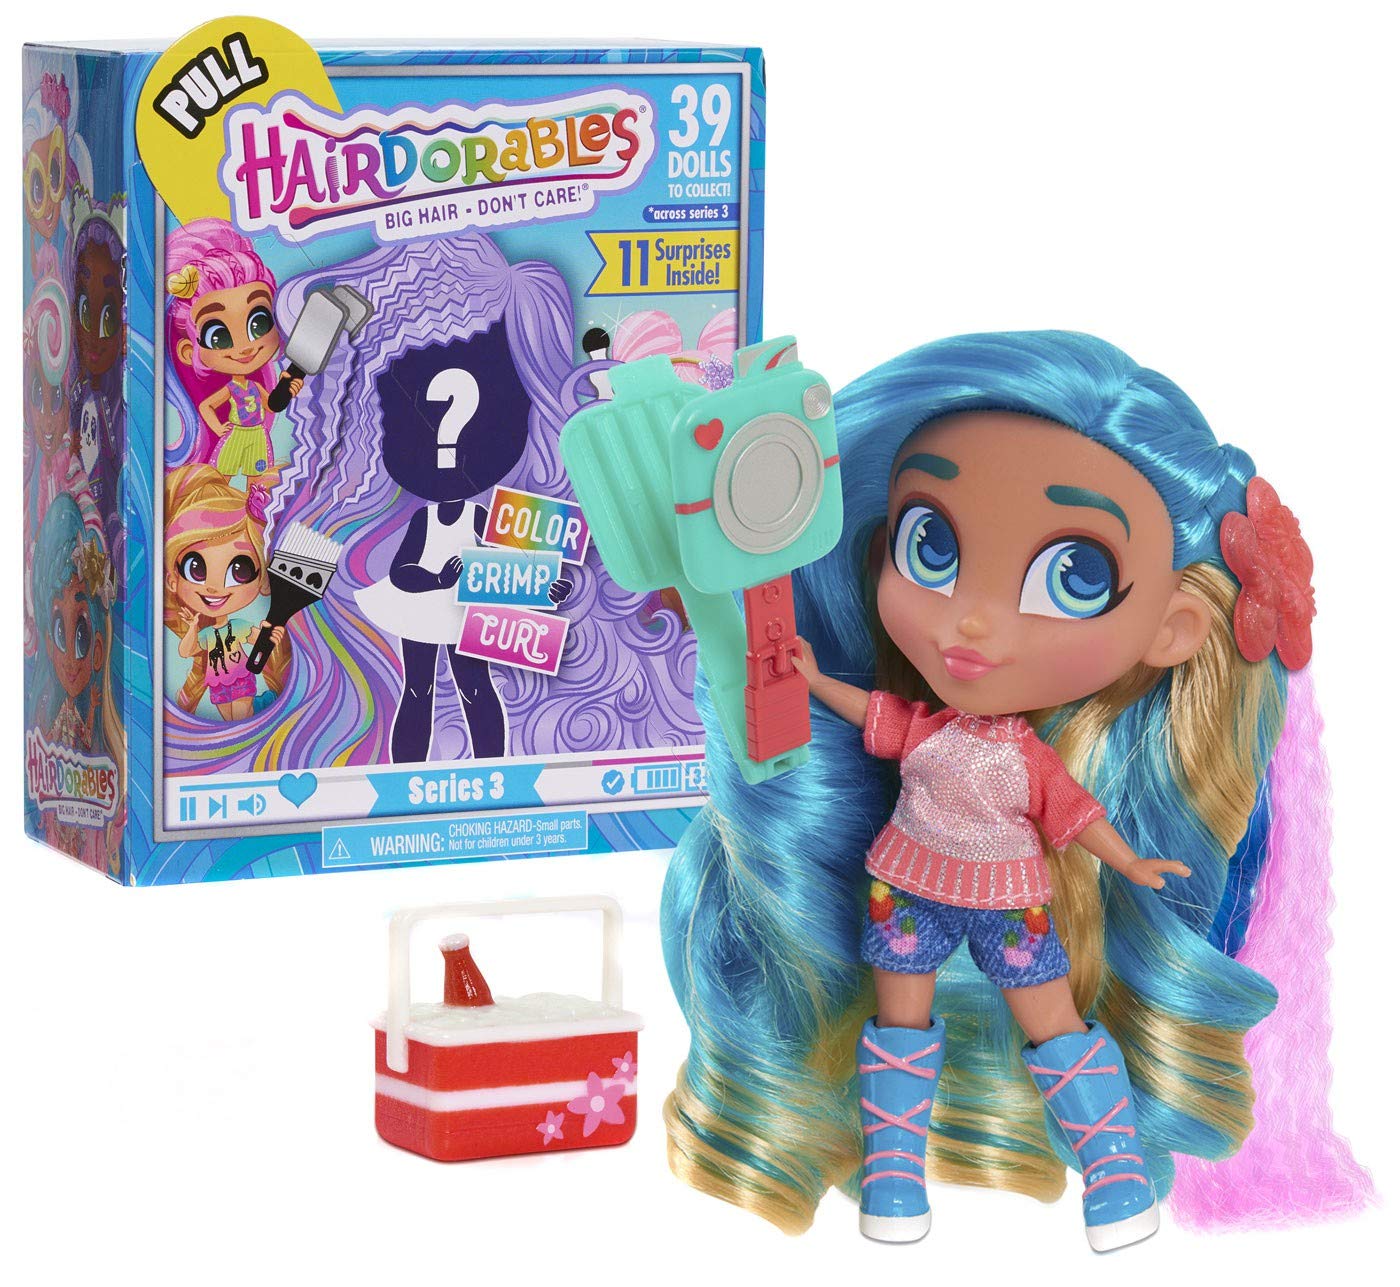 Where to Buy Hairdorables Series 3 2022 - Pre Order, Release Date Series 4